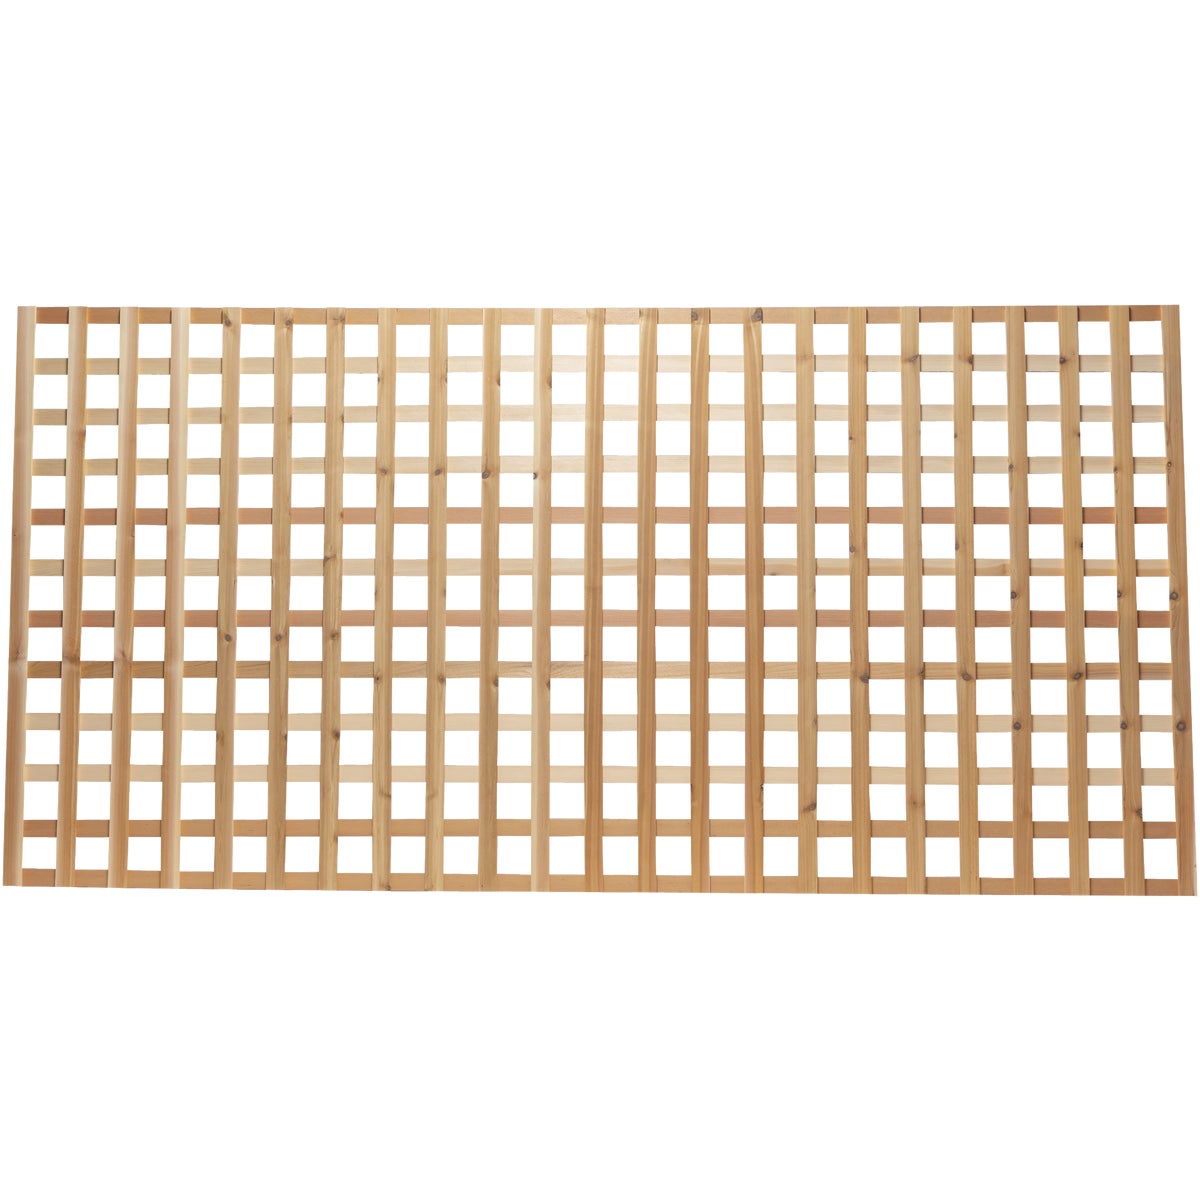 Real Wood Products 4 Ft. W x 8 Ft. L x 11/16 In. Thick Natural Western Red Cedar Heavy-Duty Lattice Panel